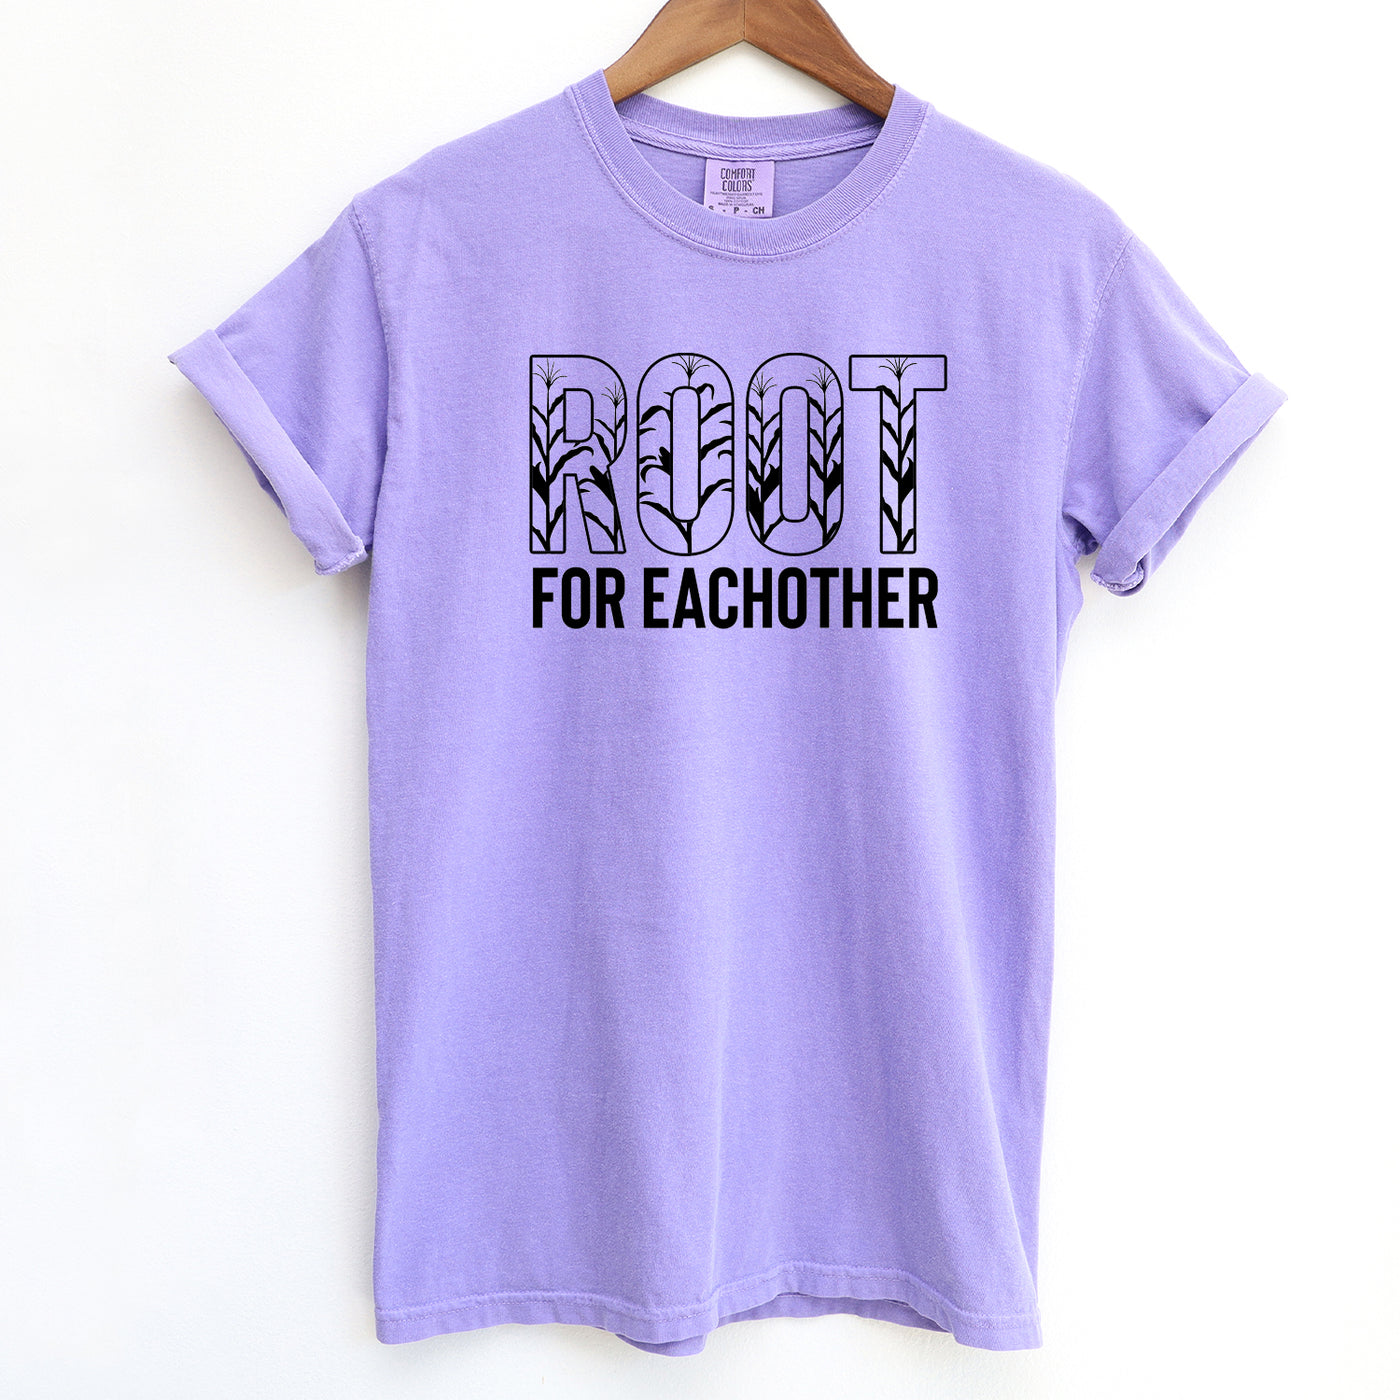 Root For Eachother ComfortWash/ComfortColor T-Shirt (S-4XL) - Multiple Colors!